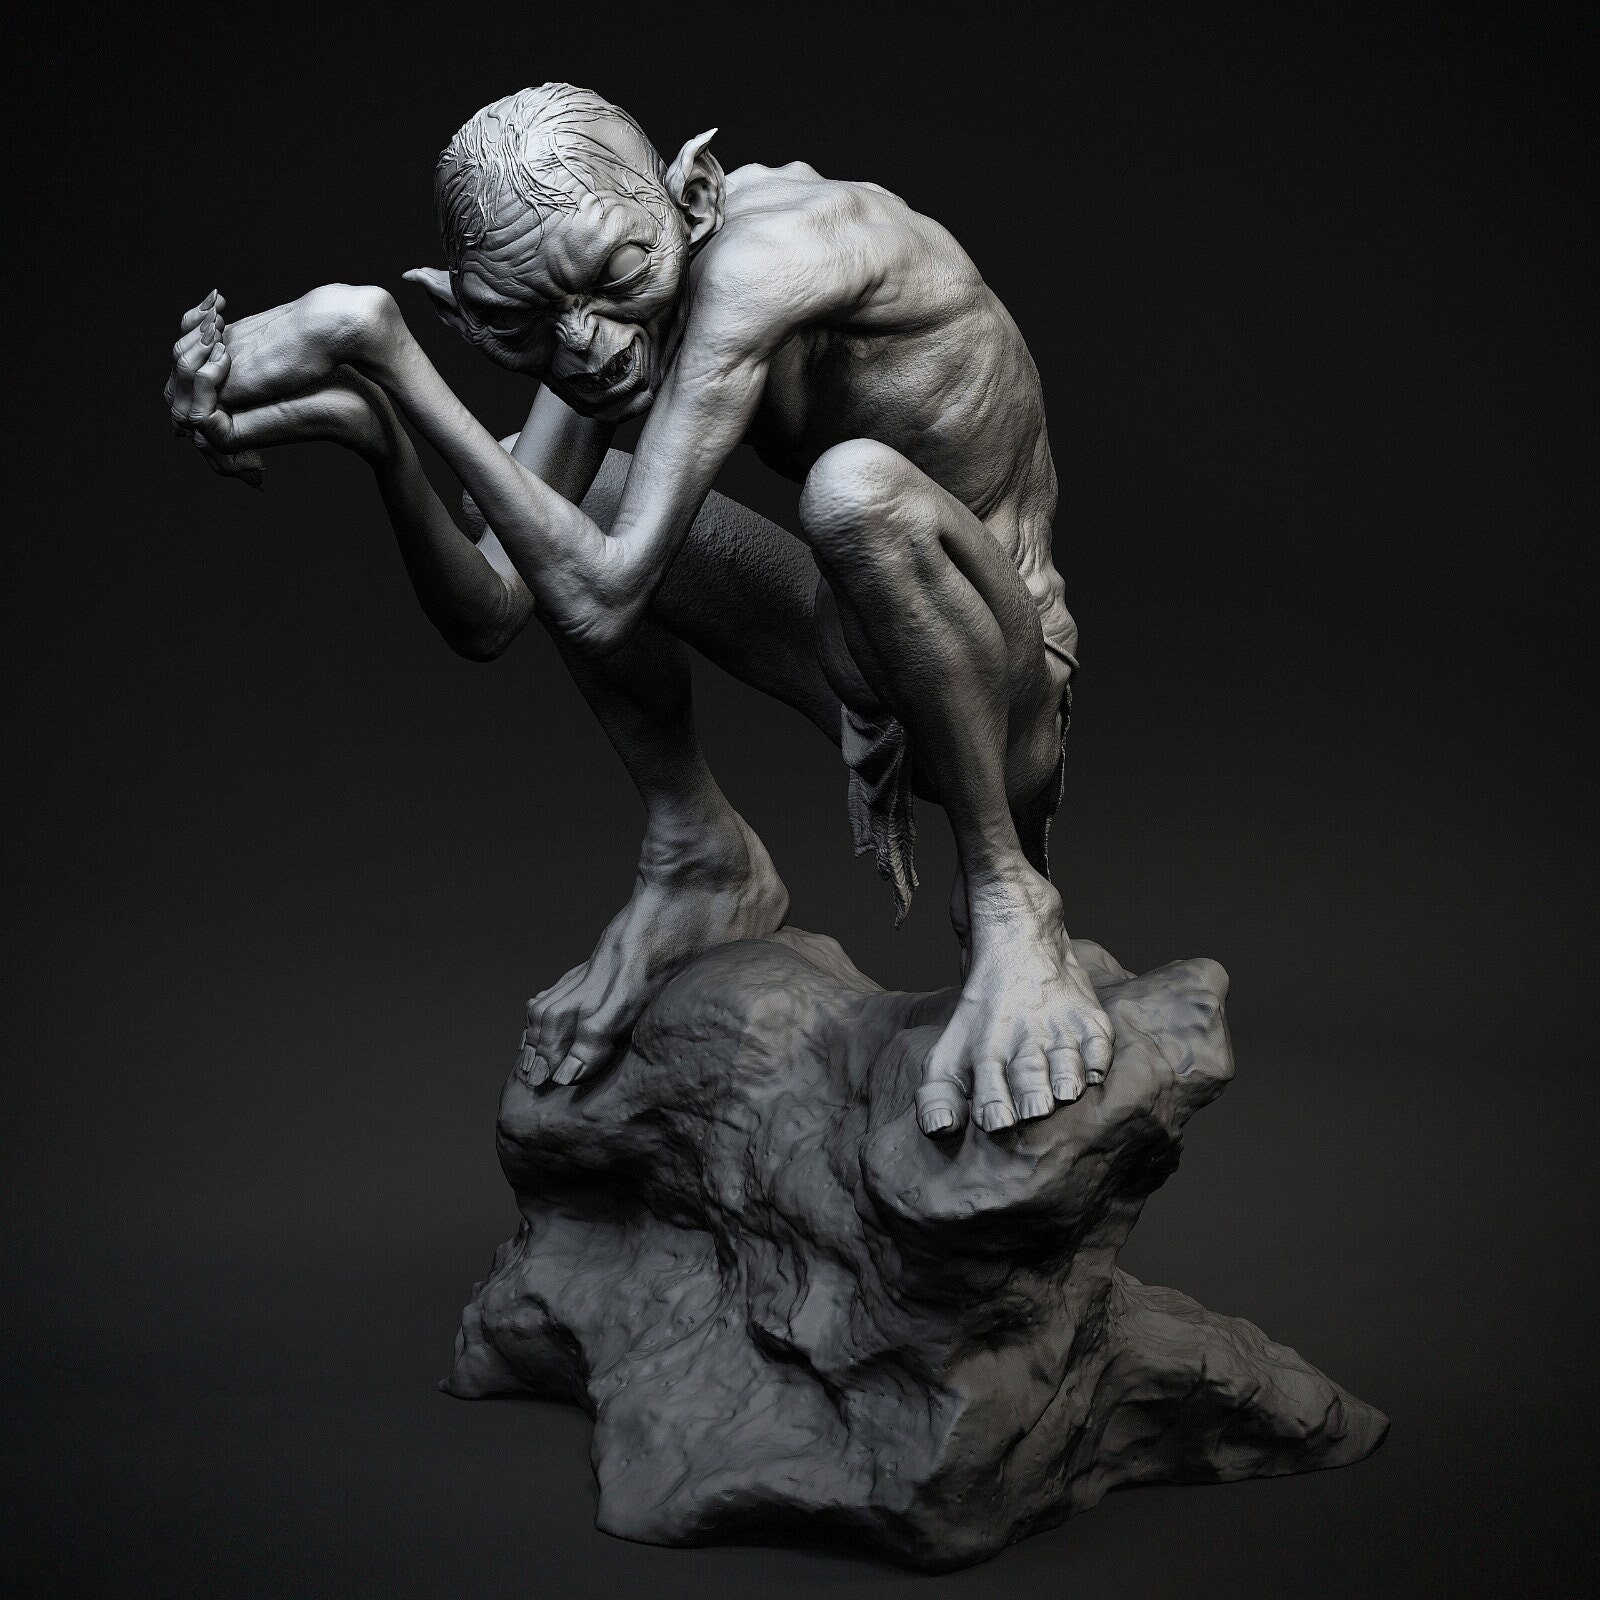 Statue: Gollum Guide to Mordor Lord of the Rings Mini Statue by Weta